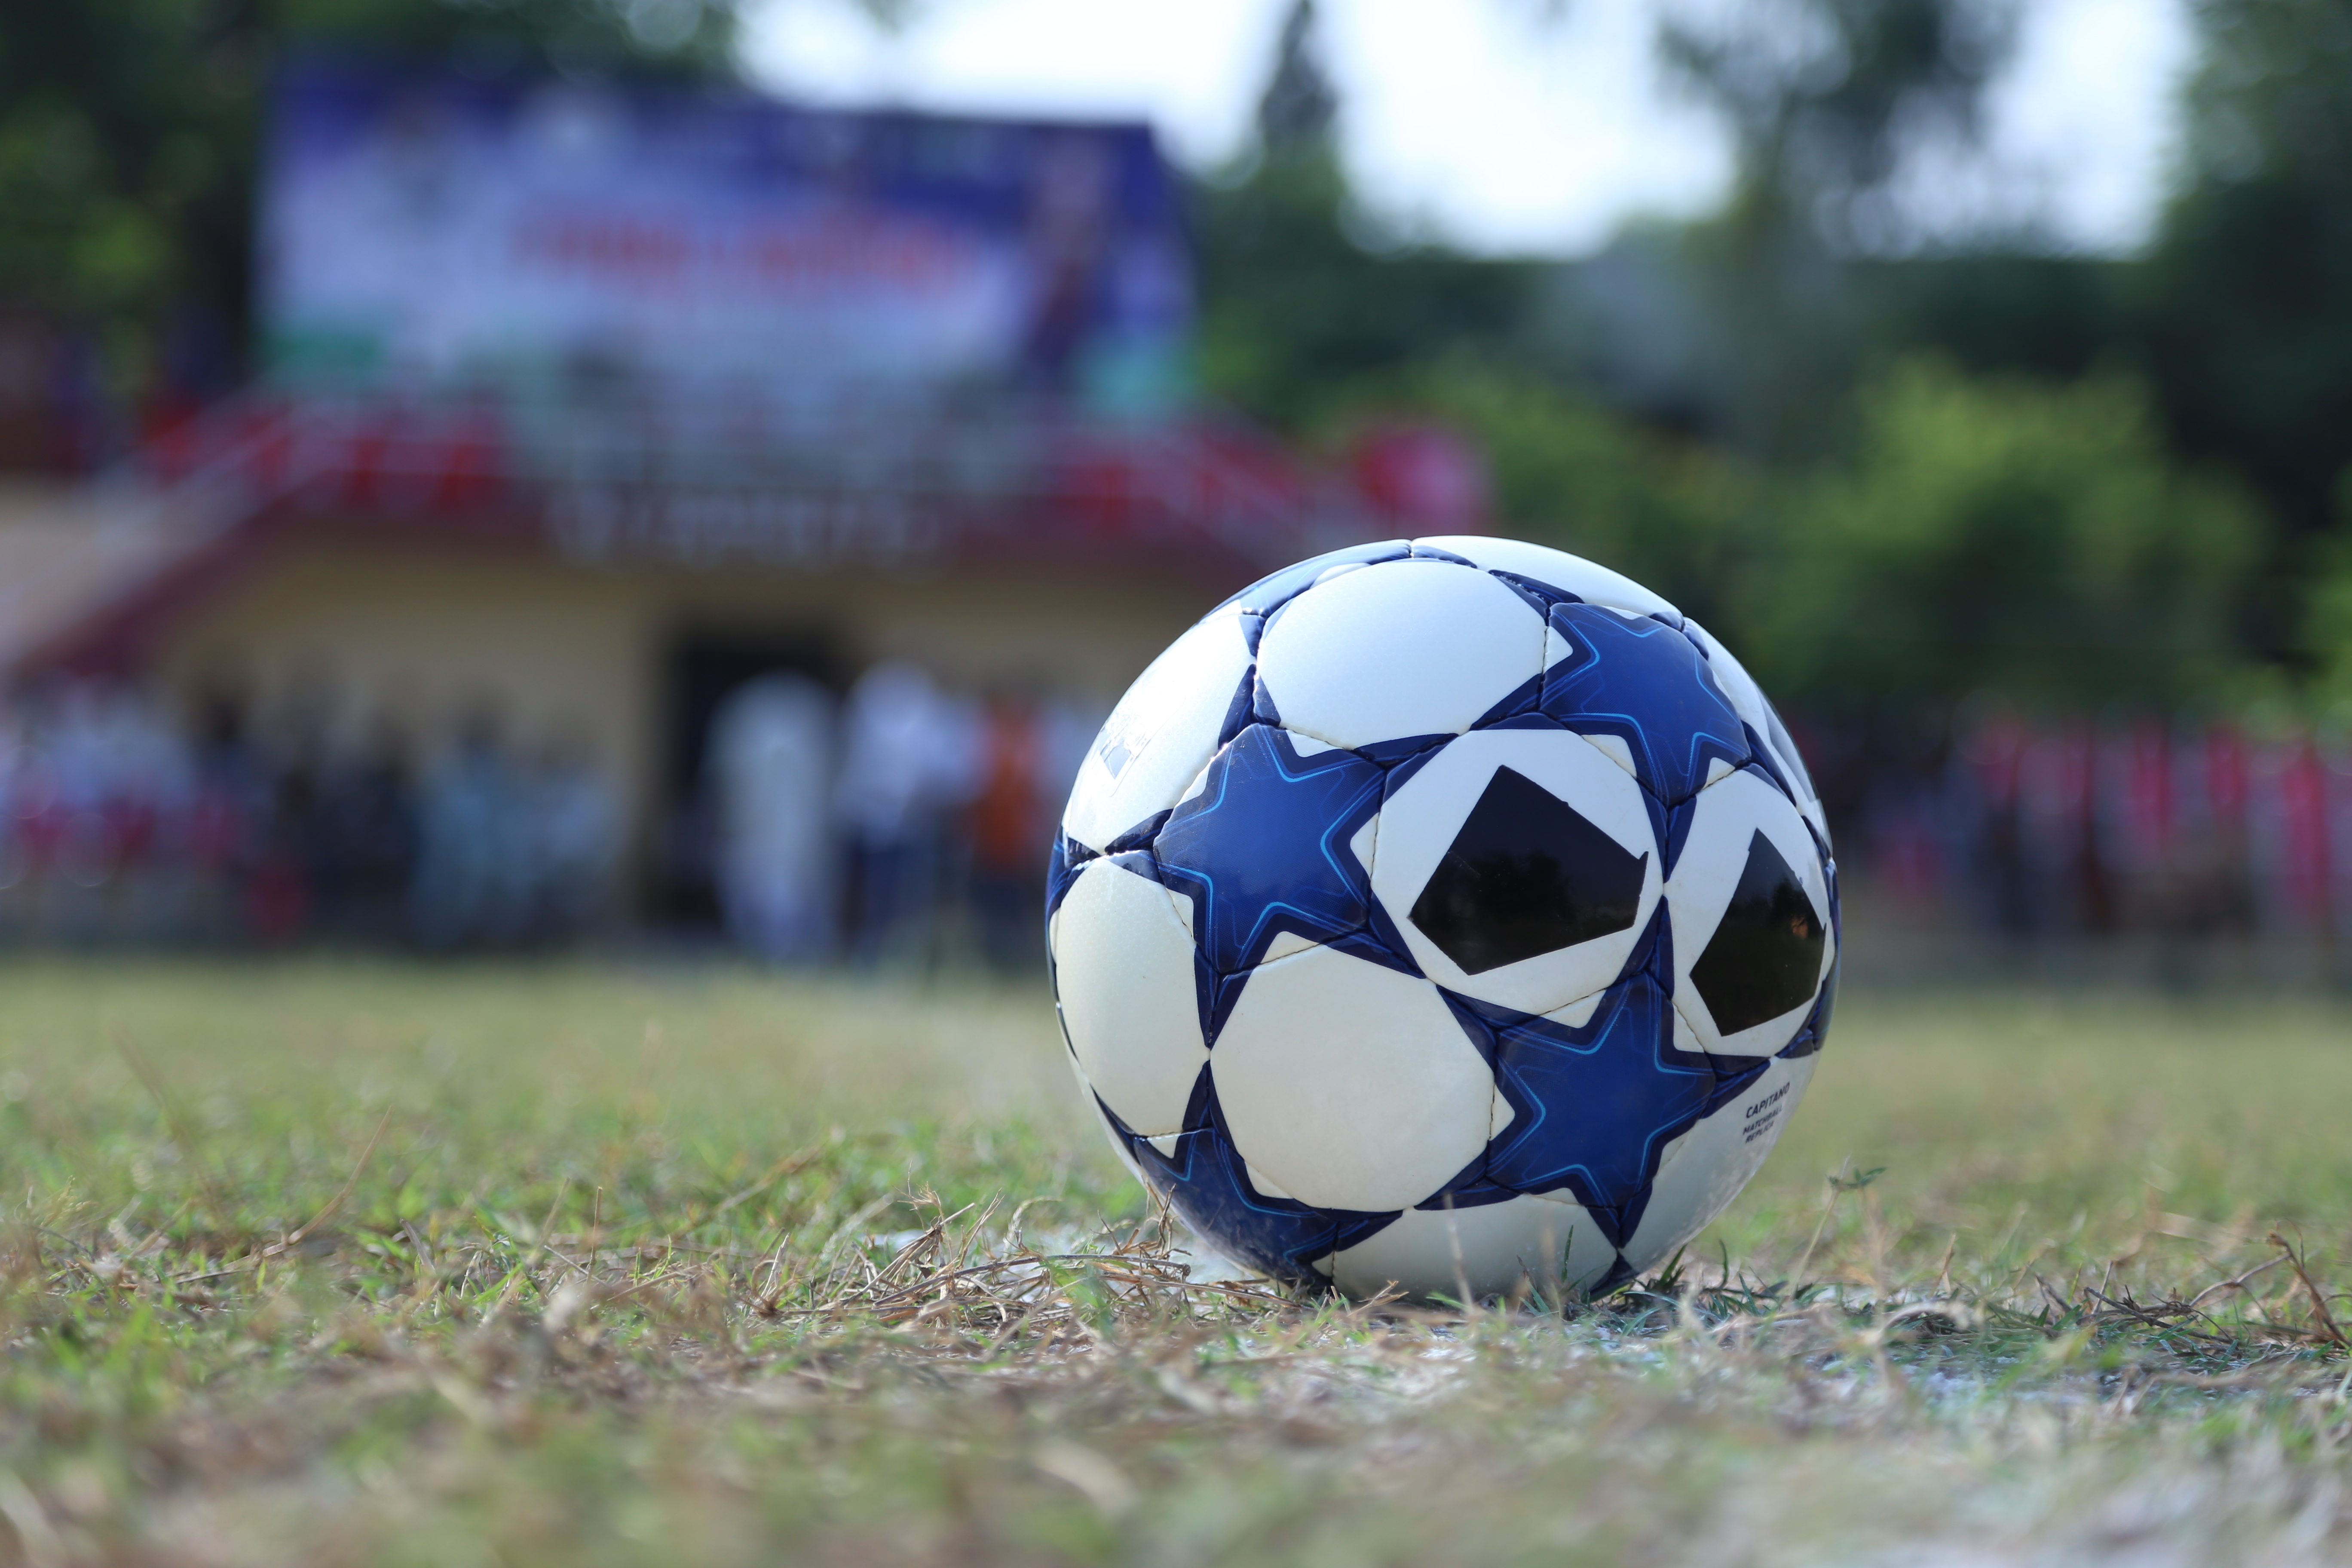 Pakistan Police hold KP Green to 1-1 draws in Challenge Cup Soccer [Frontier Post]